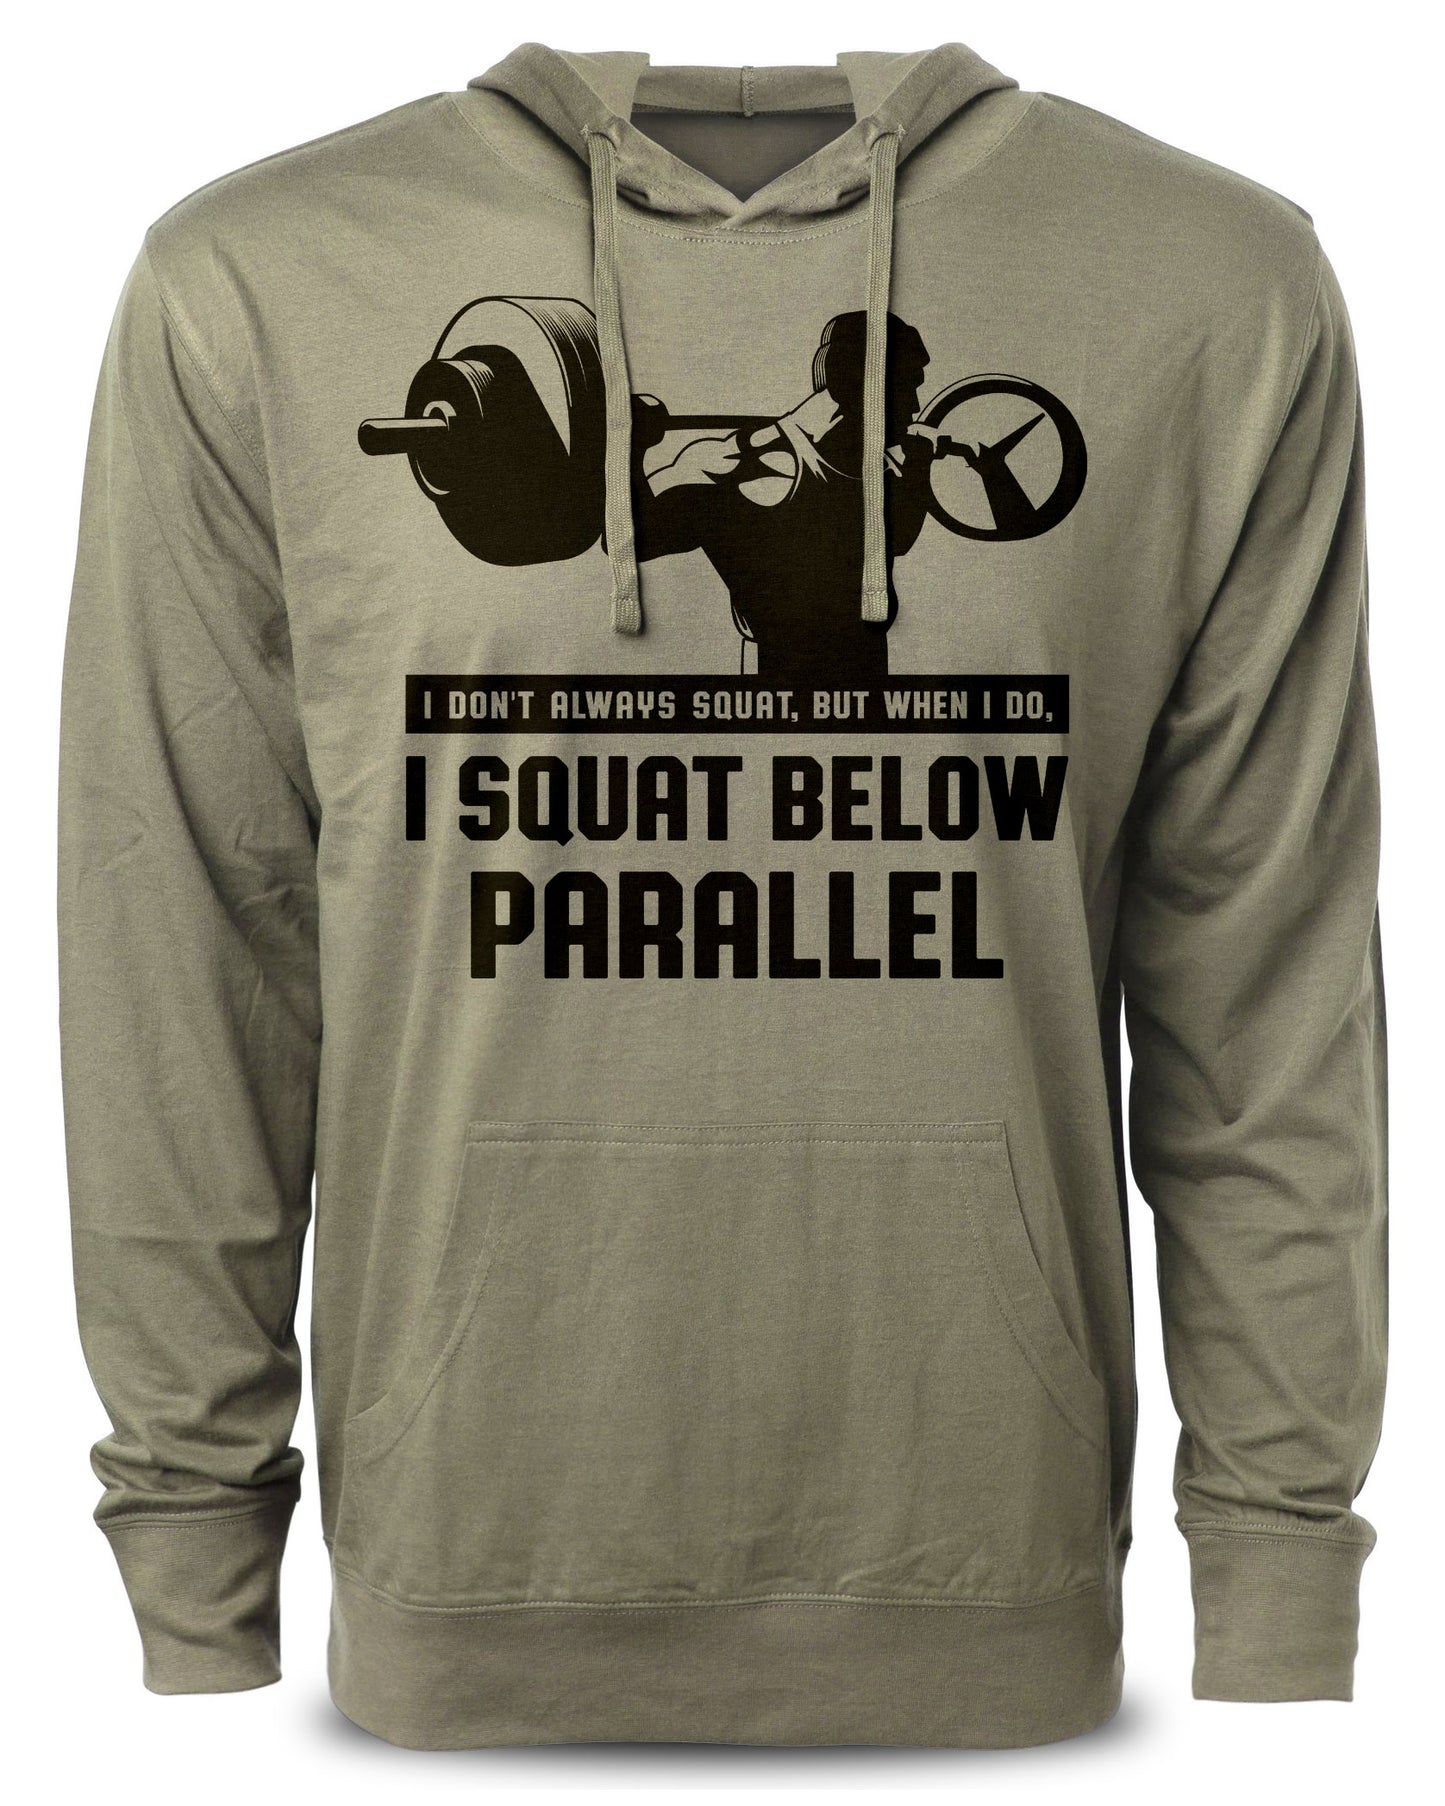 I Don't Always Squat, But When I Do, I Squat Below Parallel Workout Hoodies Funny Hoodies Gym Sweatshirt Lifting Pullover